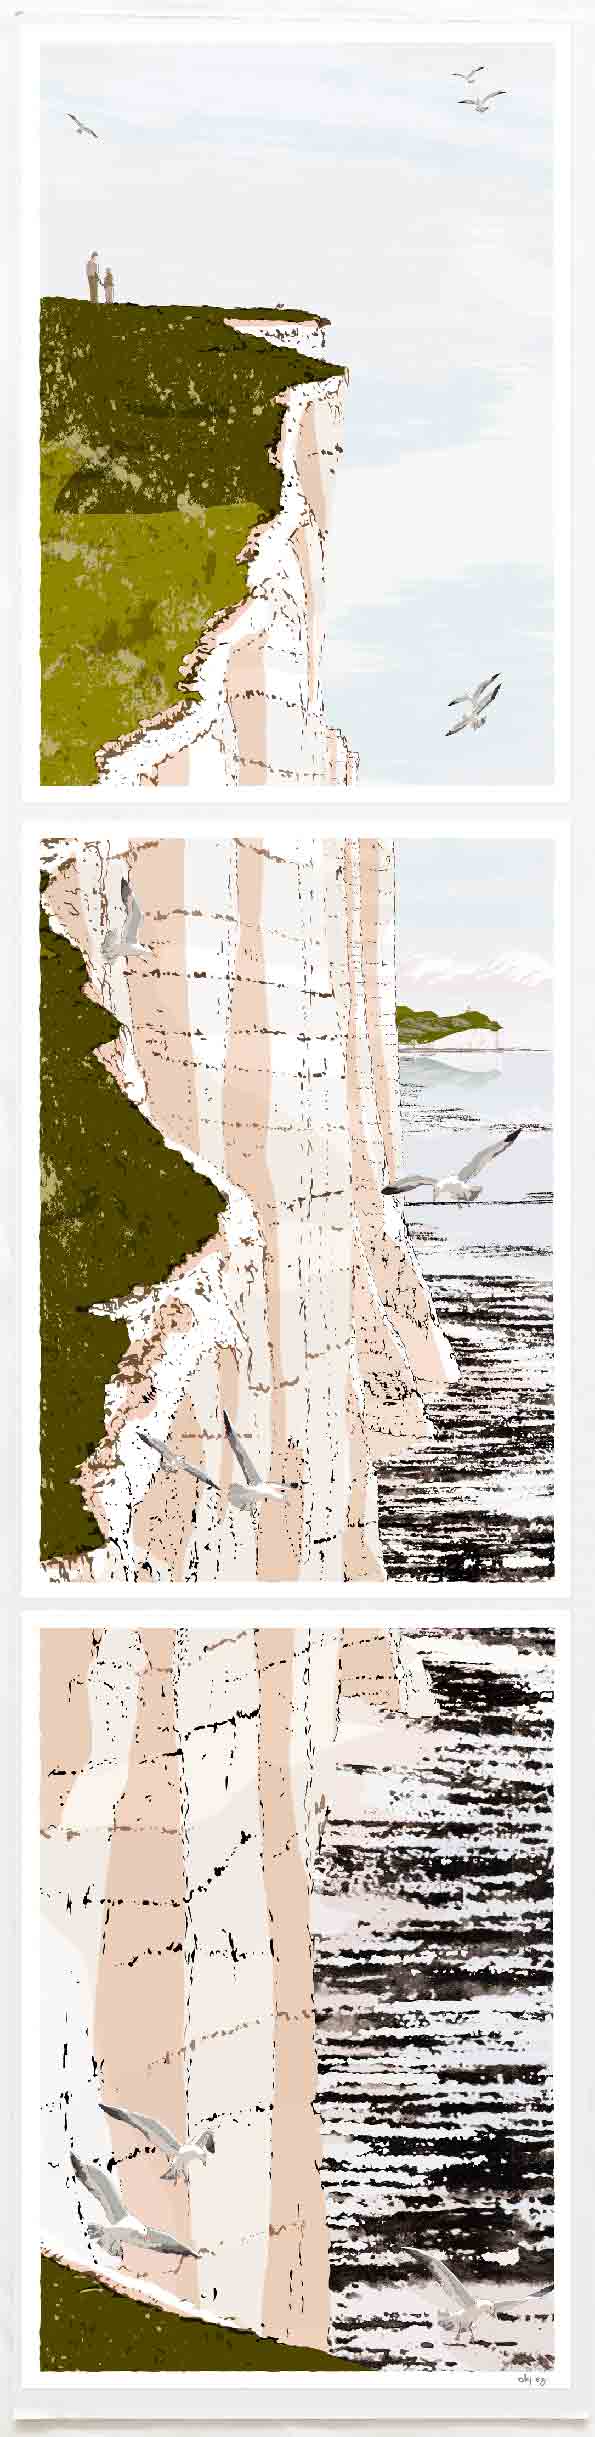 Art Print titled From Brass Point to Birling Gap and Belle Tout by artist alej ez